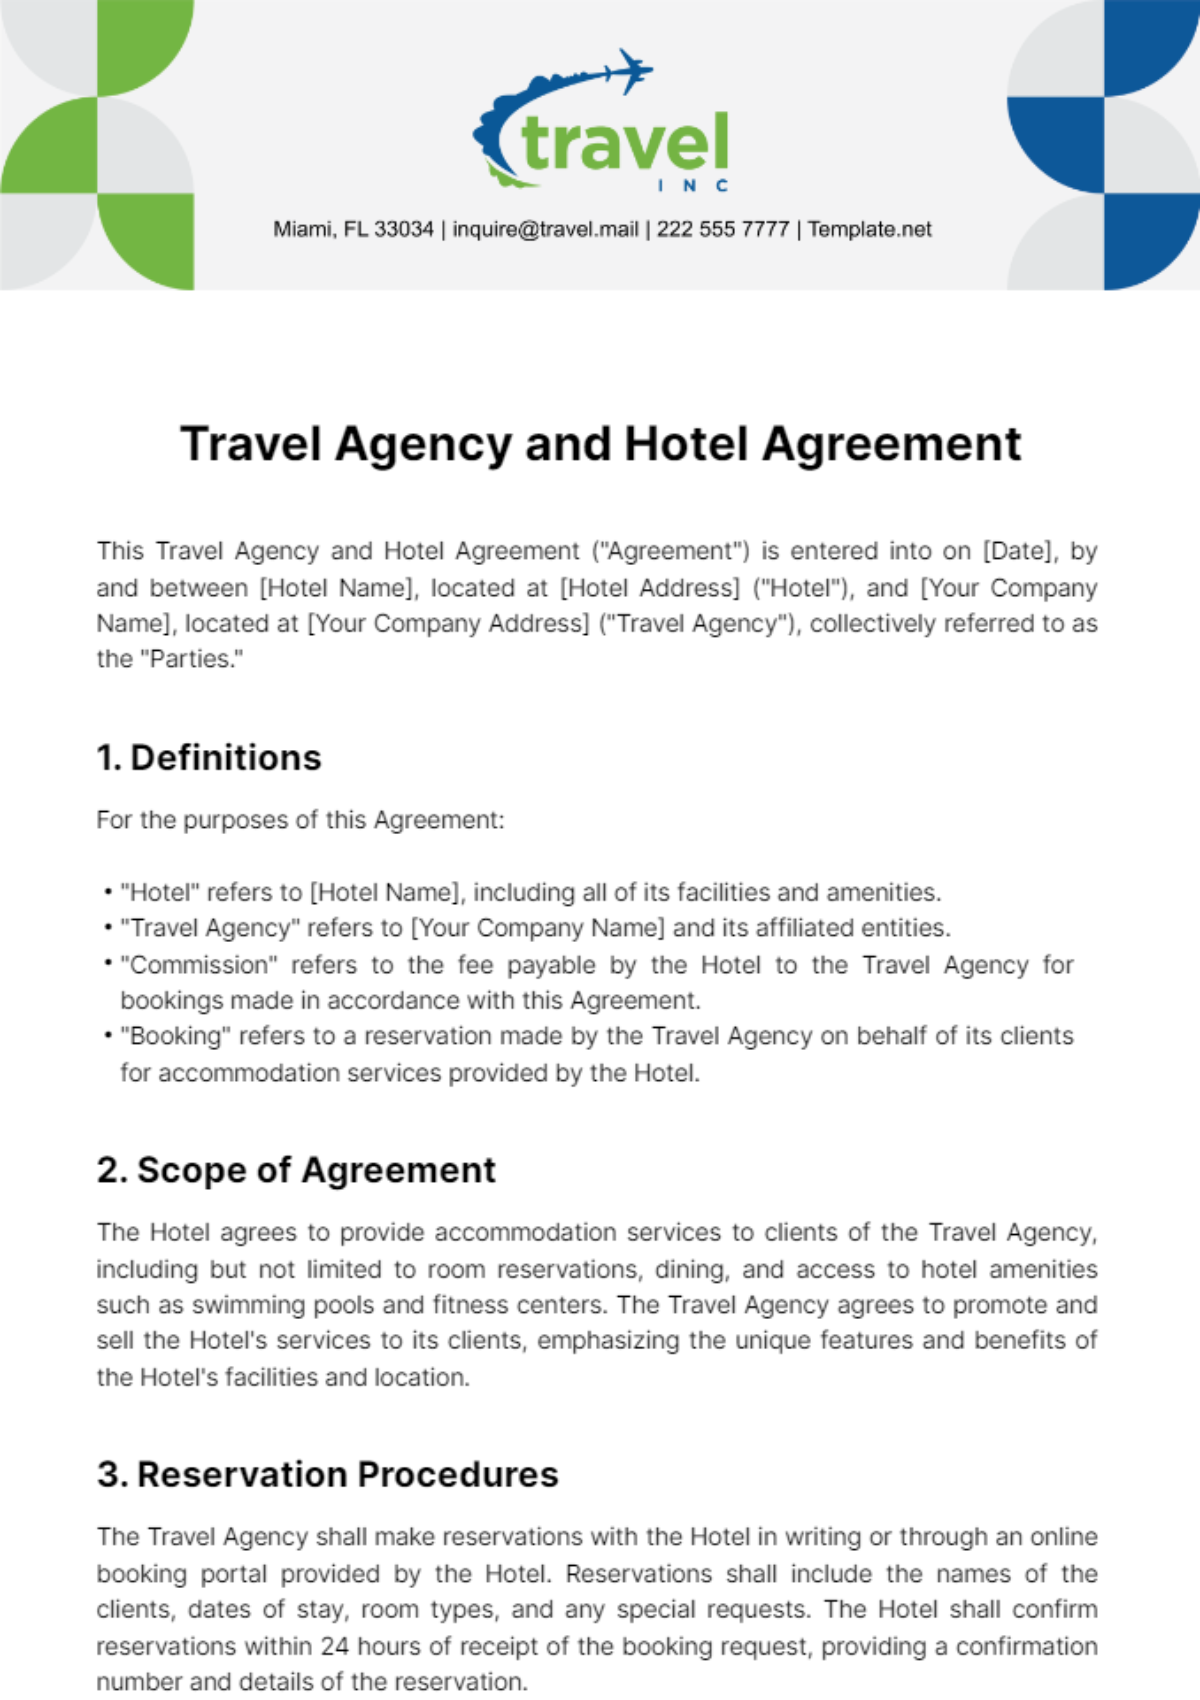 Free Travel Agency and Hotel Agreement Template